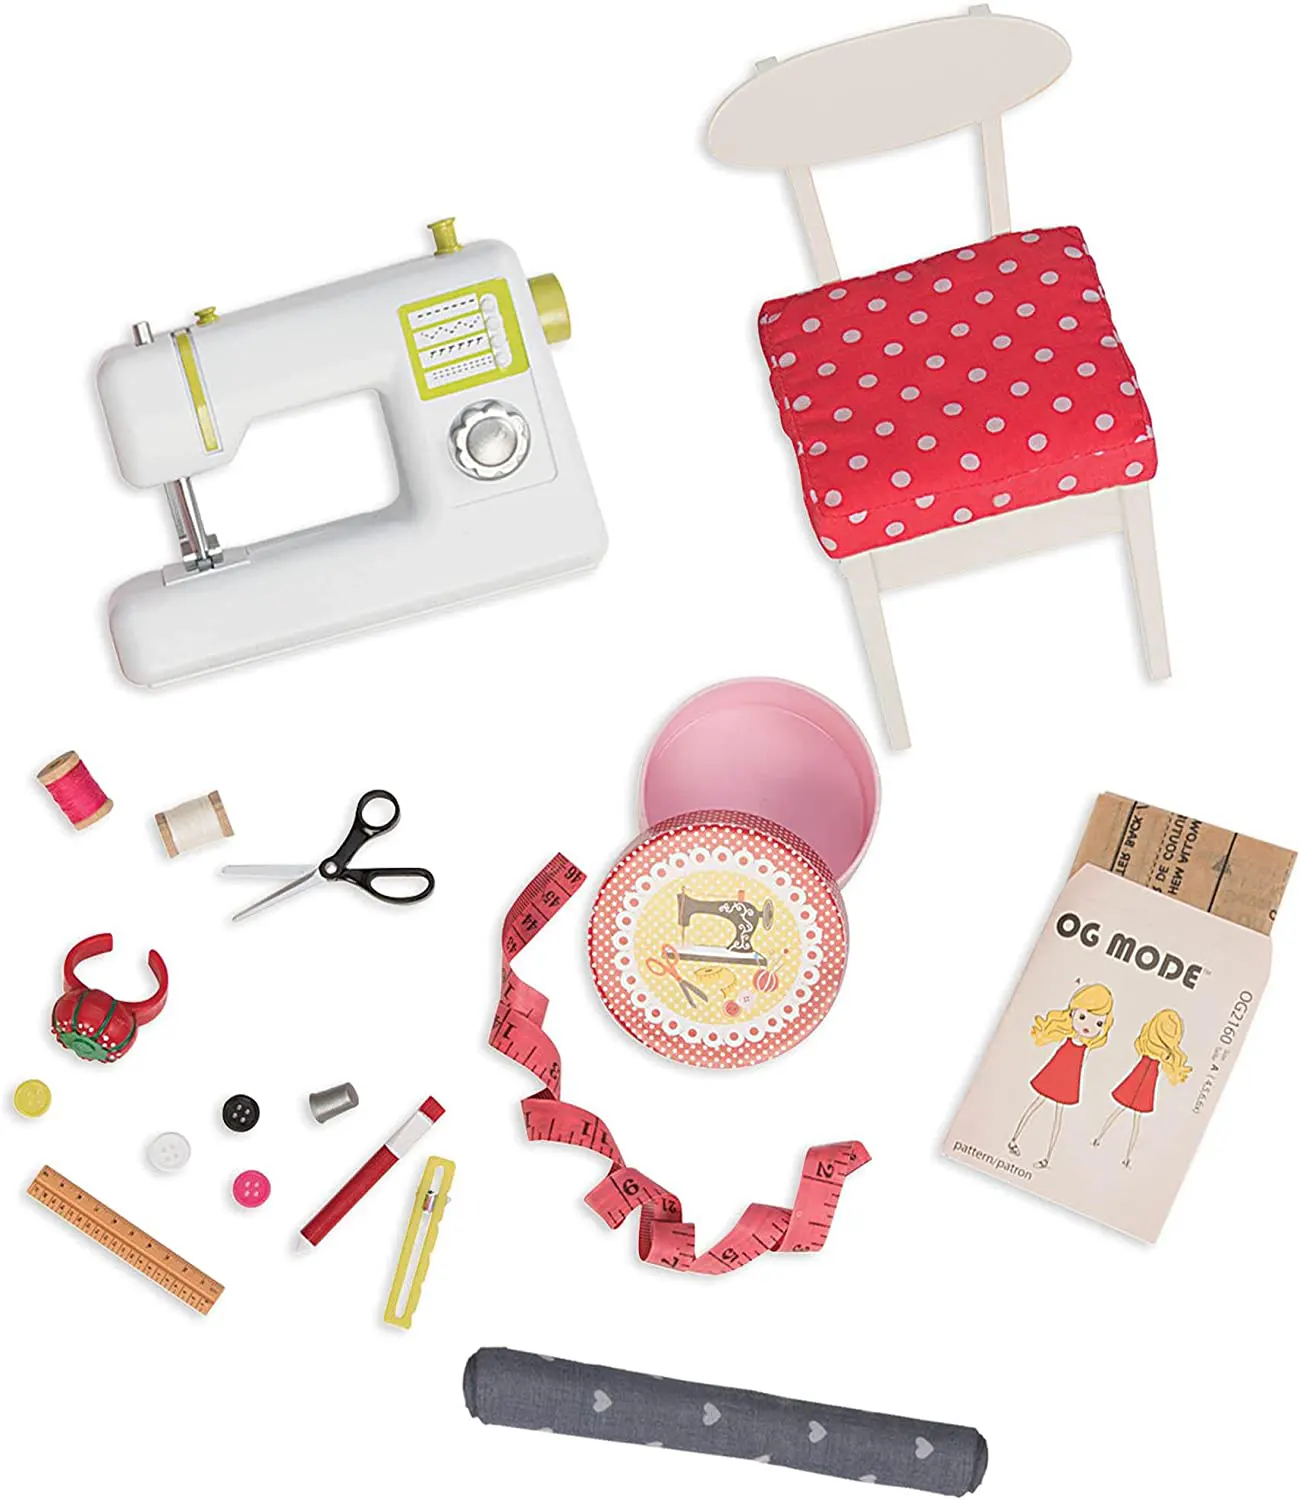 Sewing tools for dolls game